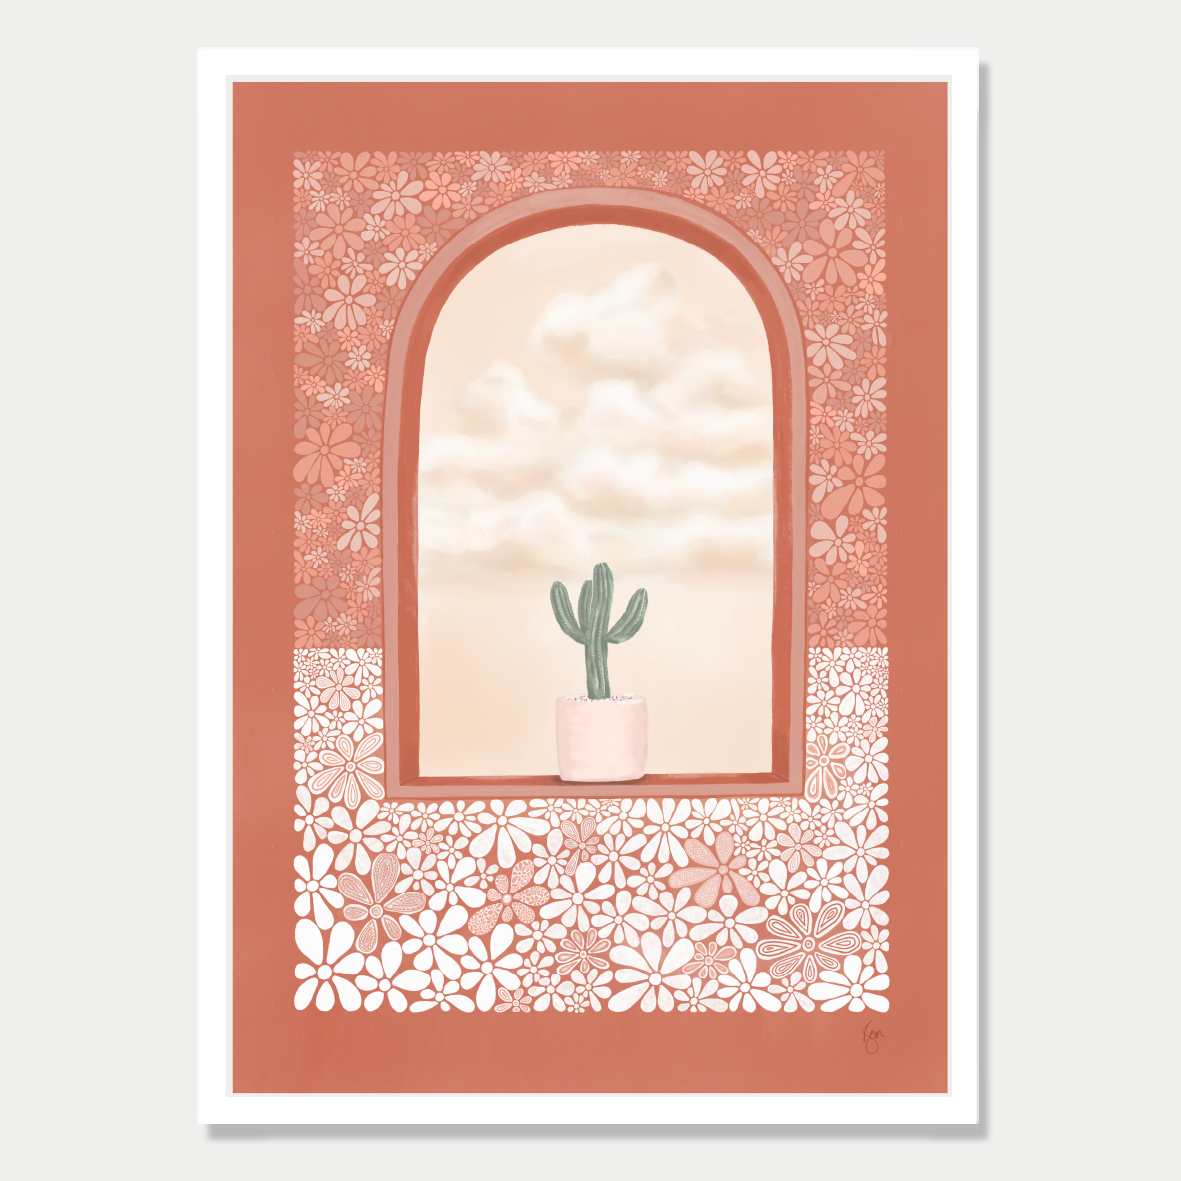 Art print of an arched window with a plant sitting in it and a view of fluffy clouds, in a terracotta colour palette, by Bon Jung. Printed in New Zealand by endemicworld and framed in white.